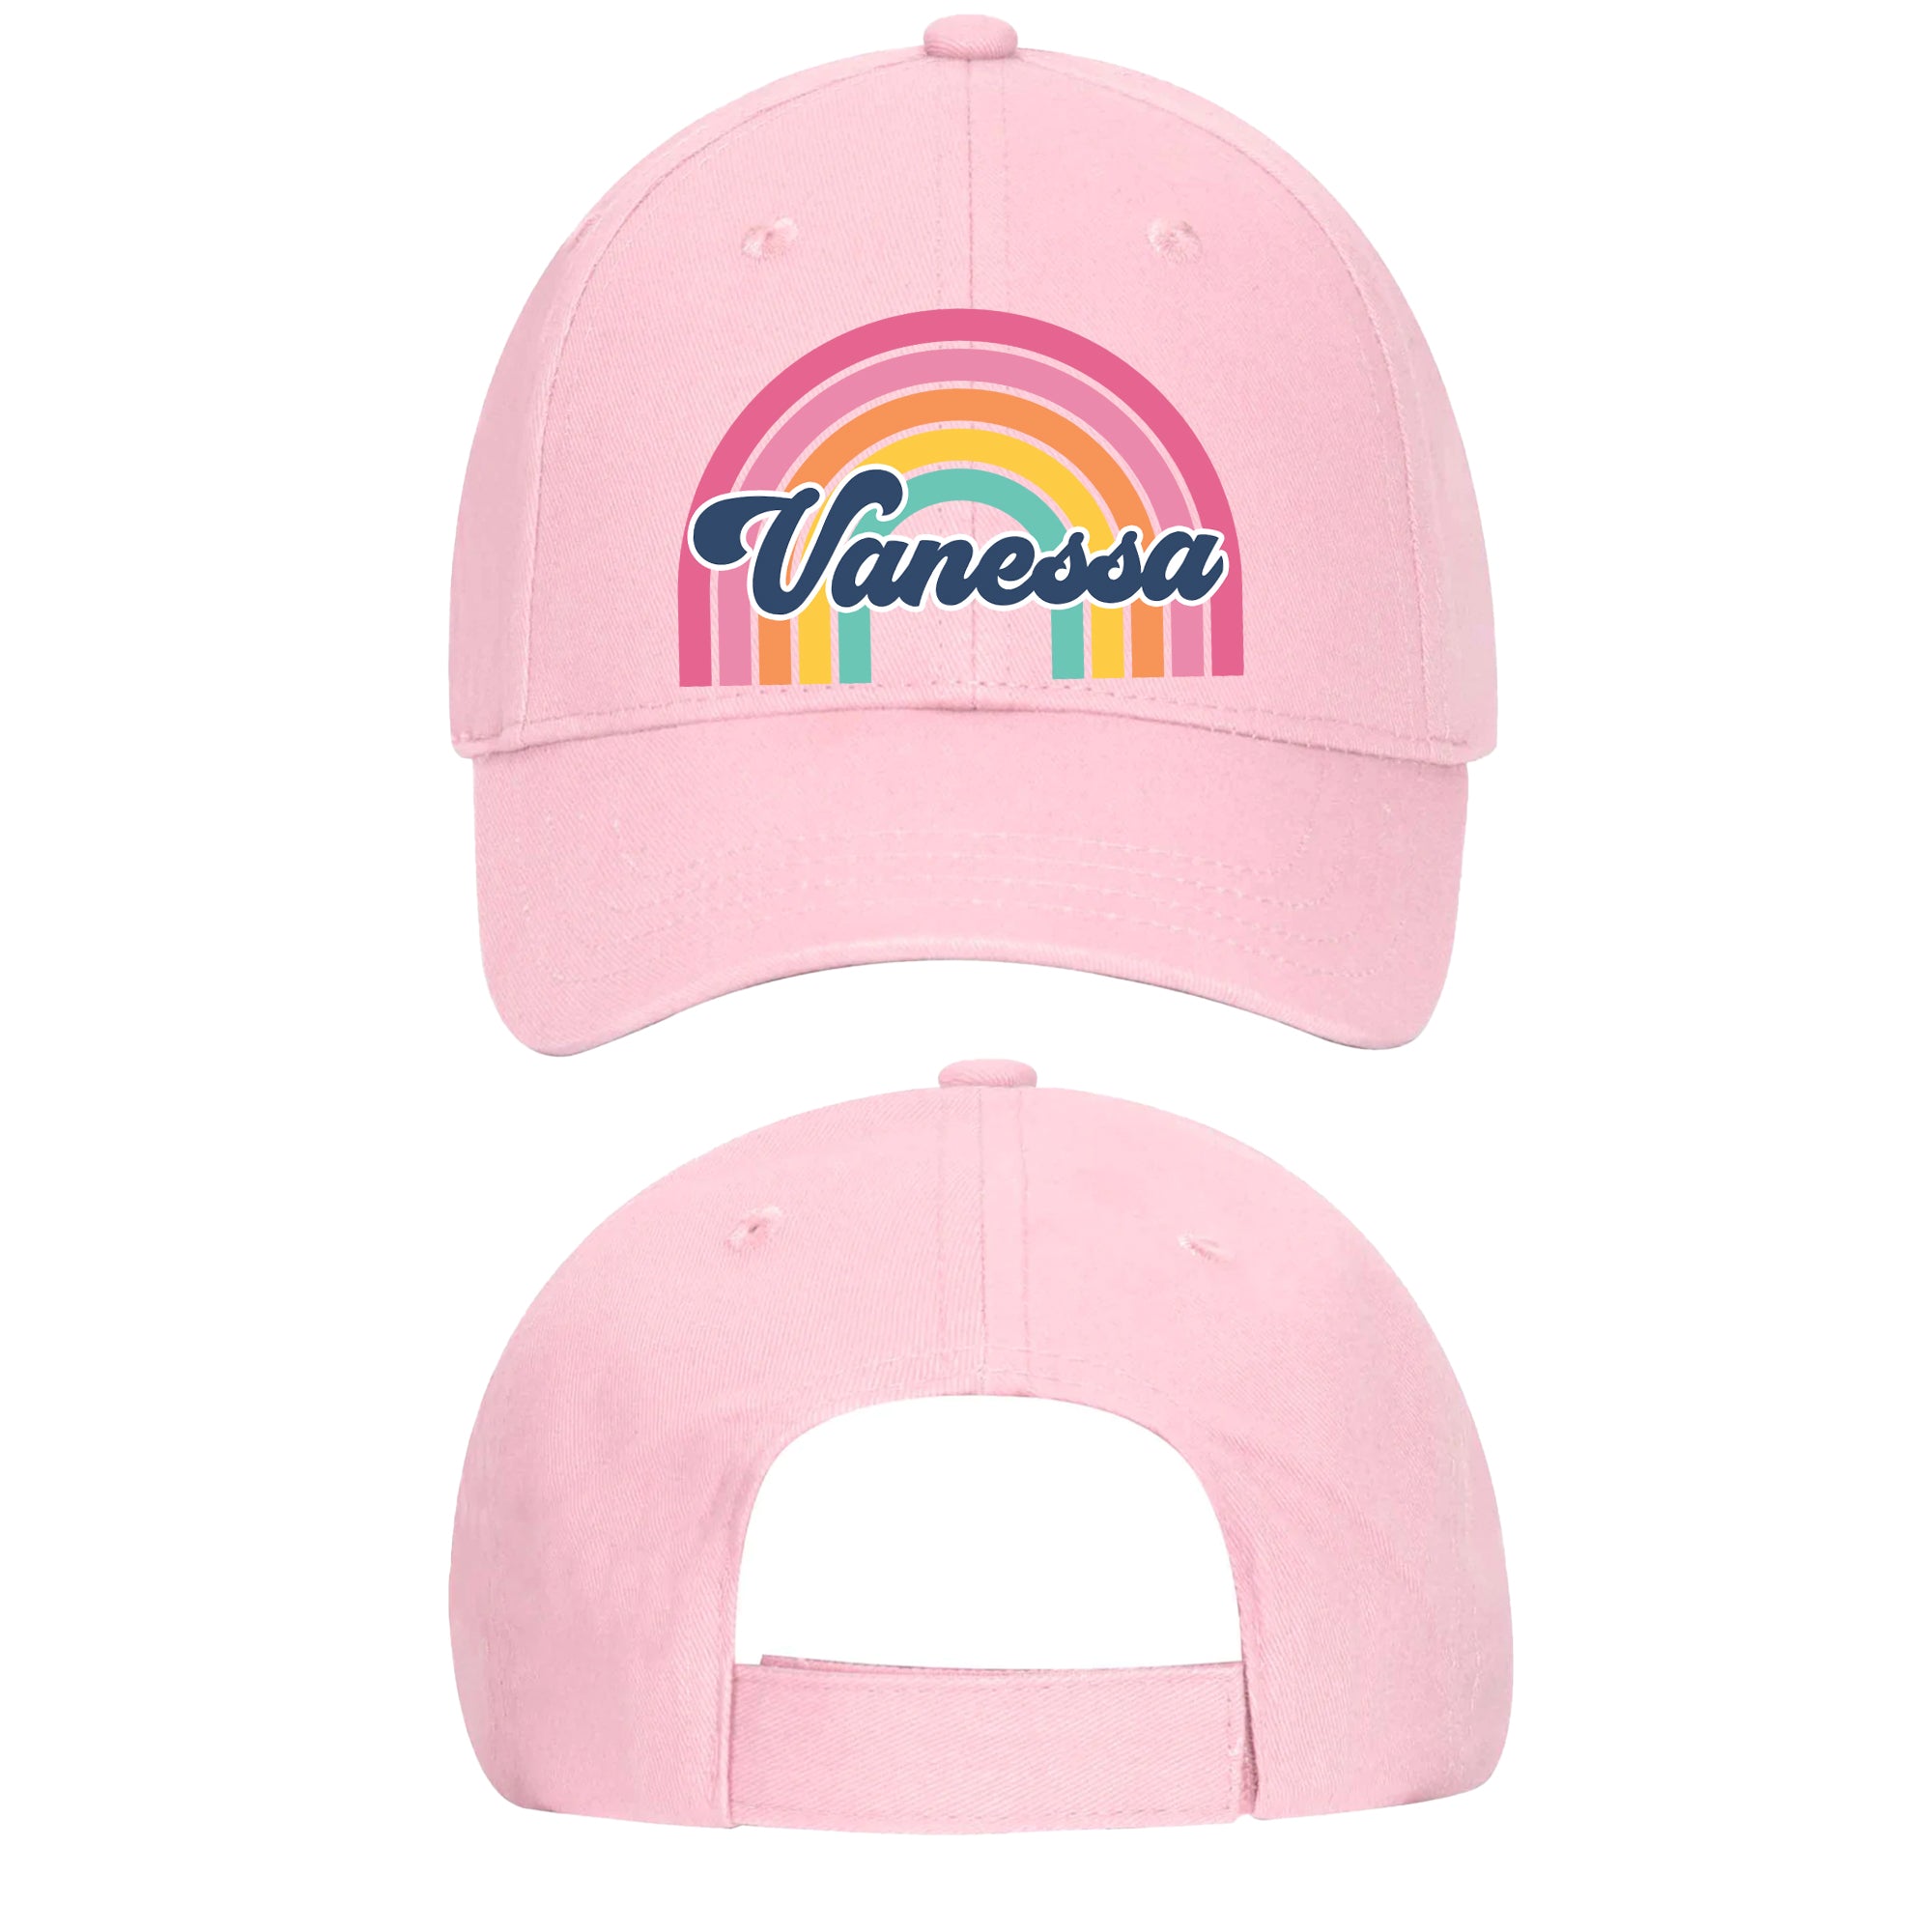 KIDS Personalized Hat - Rainbow Name